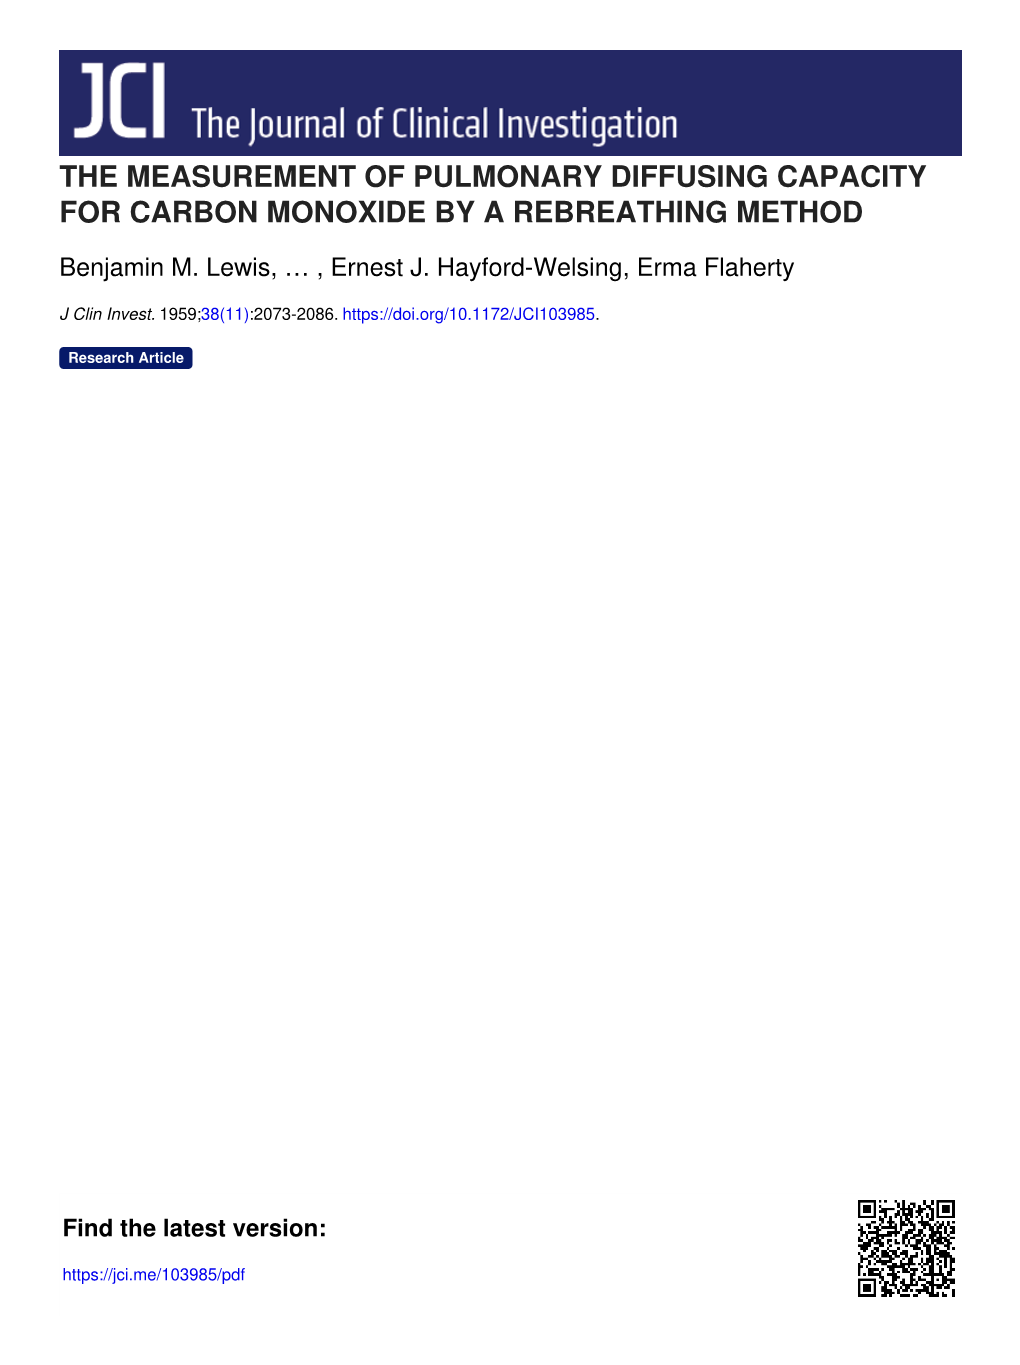 The Measurement of Pulmonary Diffusing Capacity for Carbon Monoxide by a Rebreathing Method